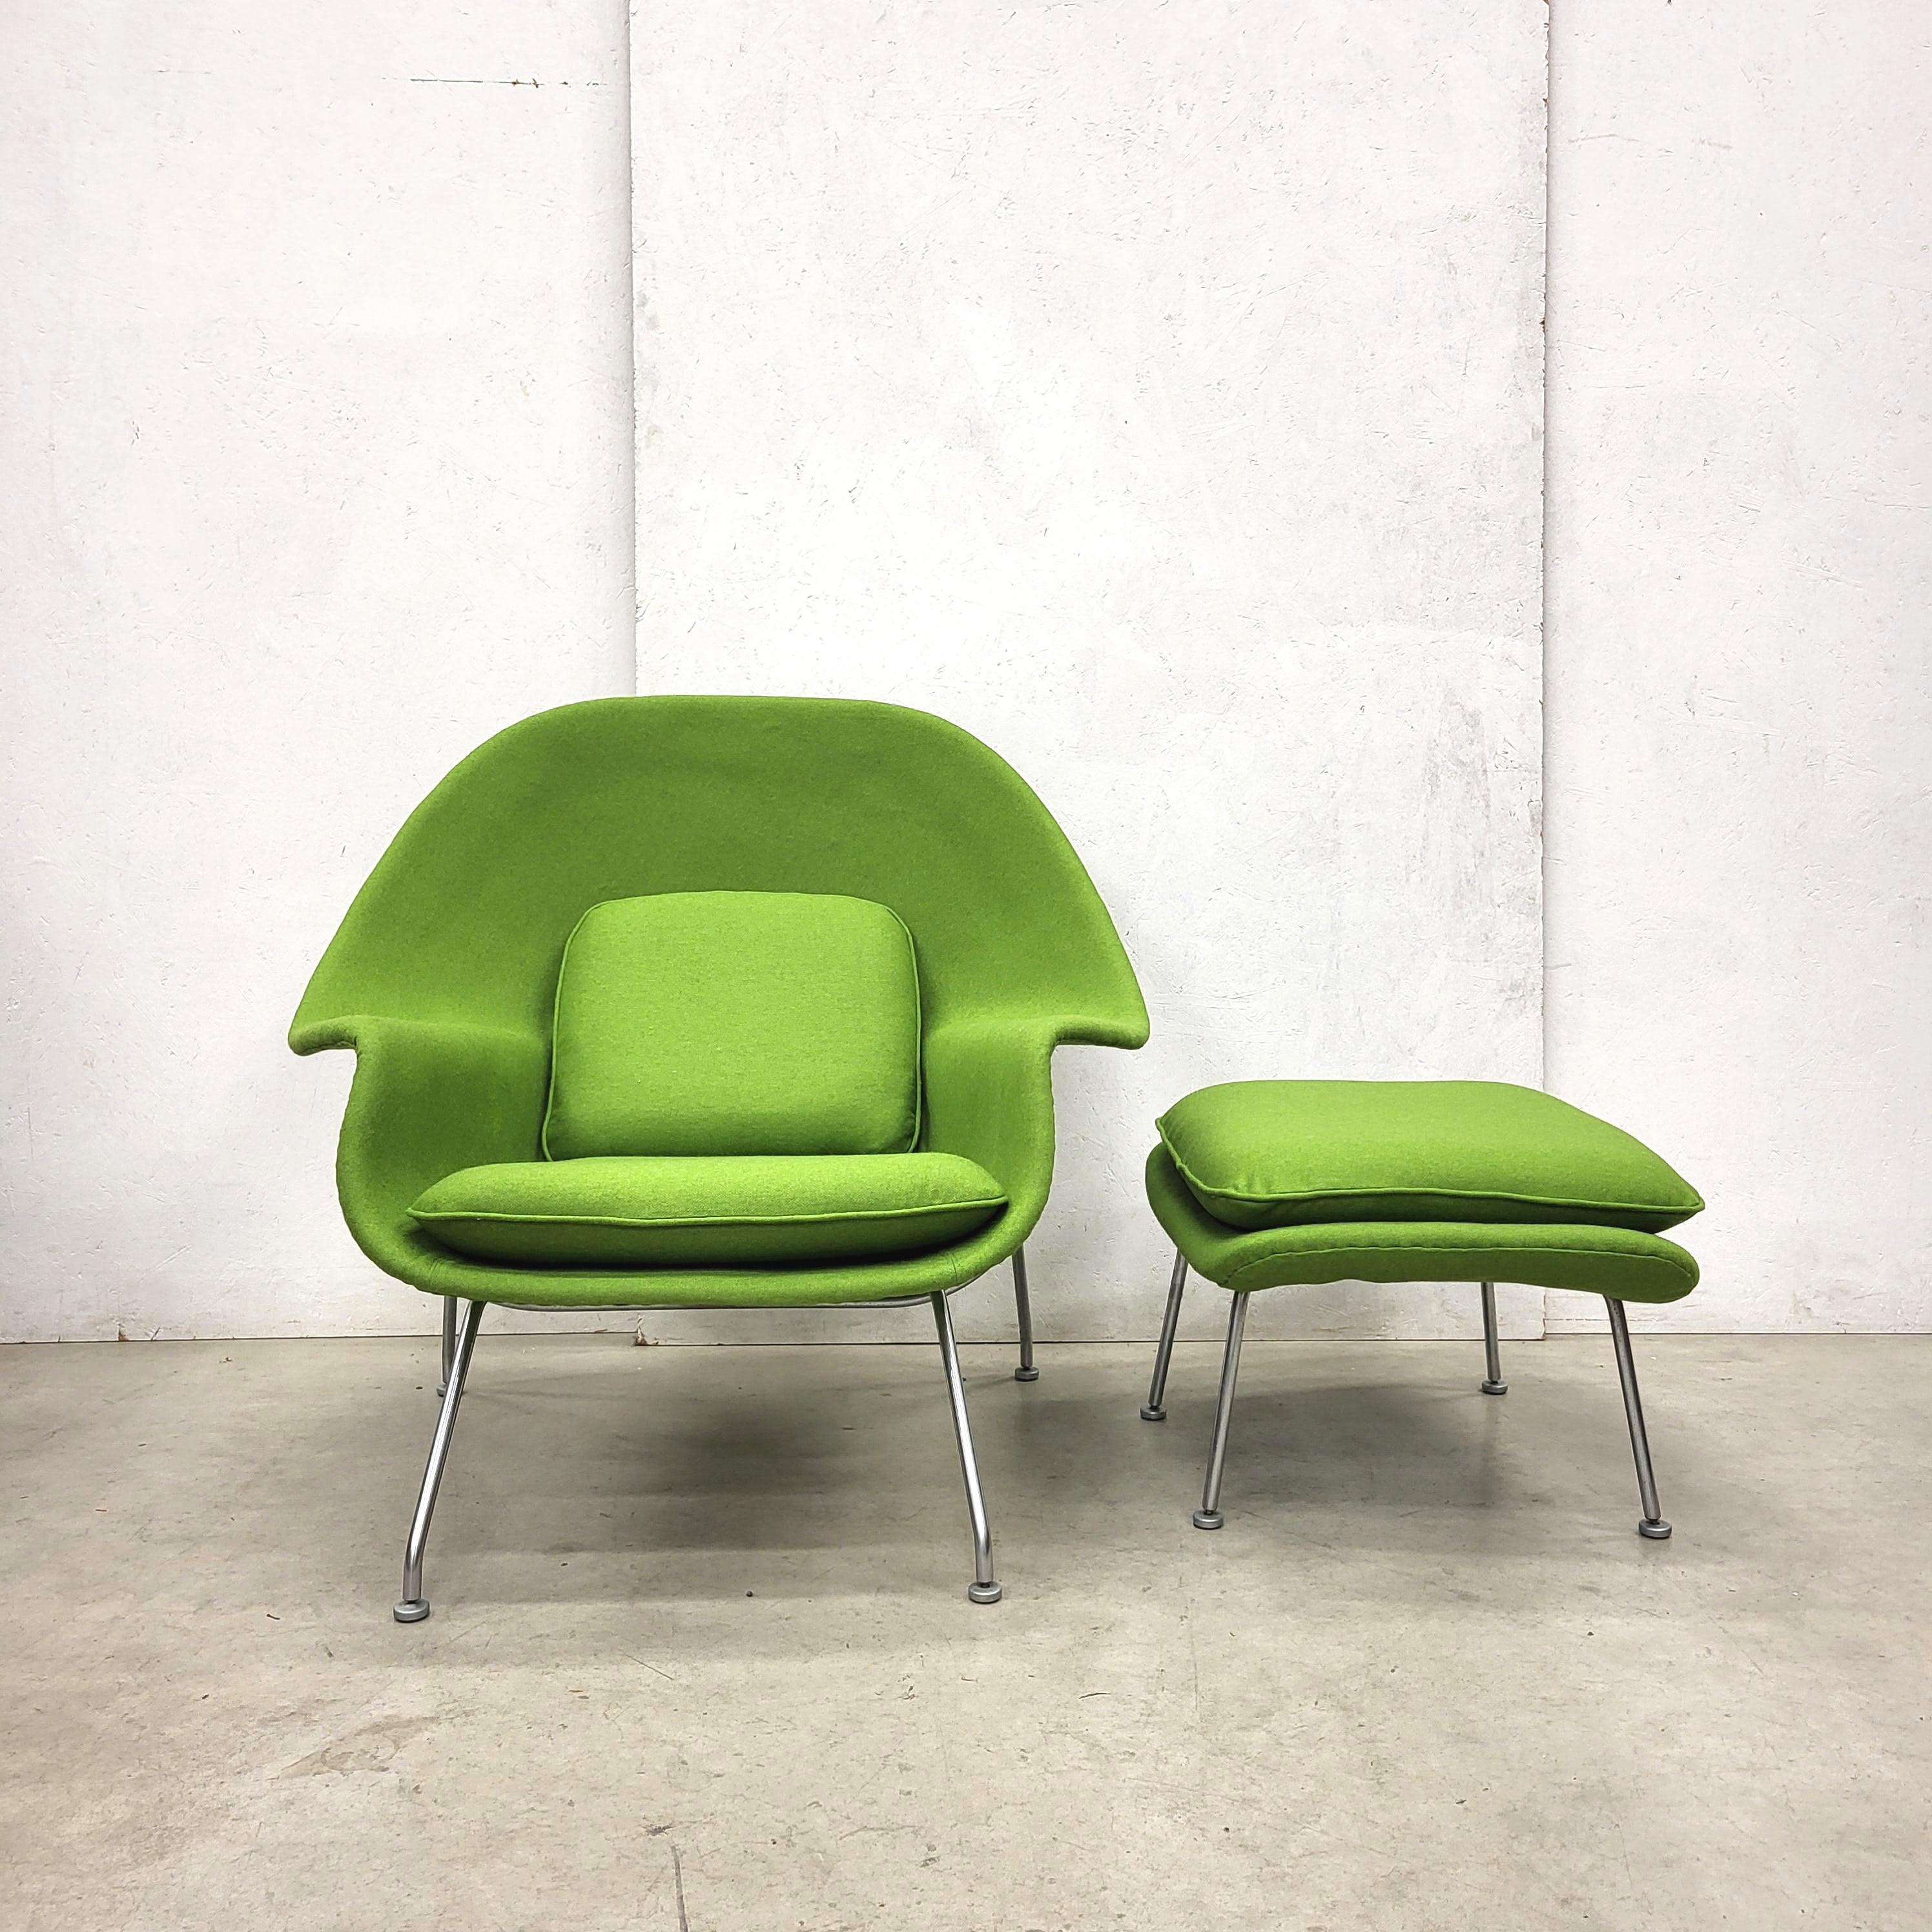 Early Woodwood Green Womb chair and ottoman by Eero Saarinen for Knoll. 

The groundbreaking Womb chair was designed in 1948 by Eero Saarinen at Florence Knoll's request for 